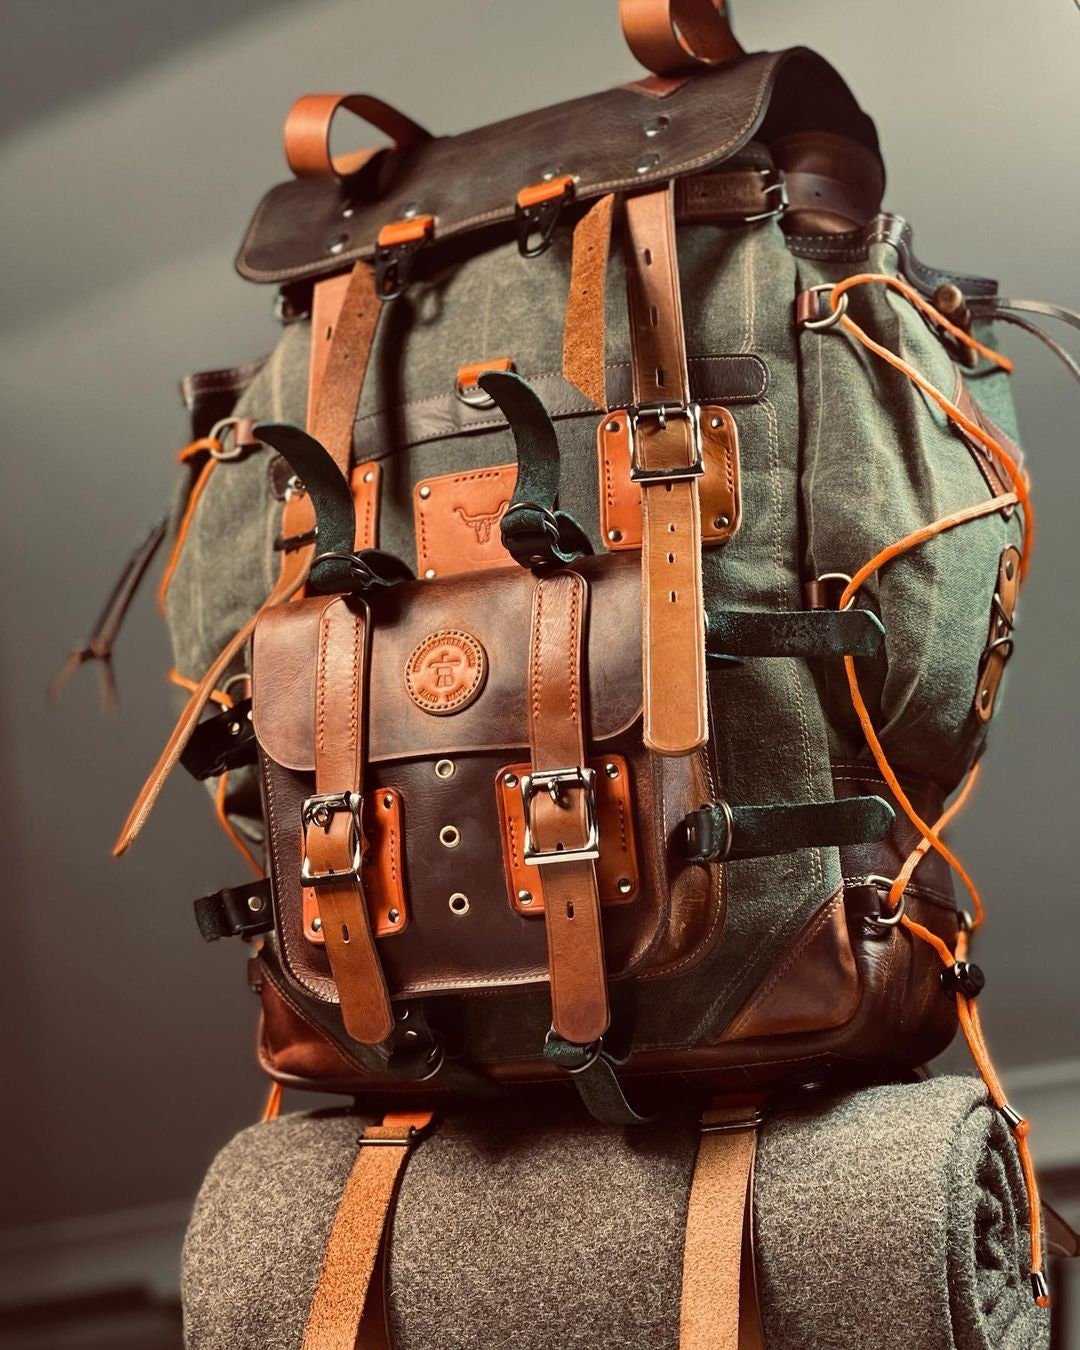 Green Backpack | Bushcraft Design Awards | Handmade Leather and Waxed Backpack for Travel, Camping,Military | 45 Liter | Personalization bushcraft - camping - hiking backpack 99percenthandmade   